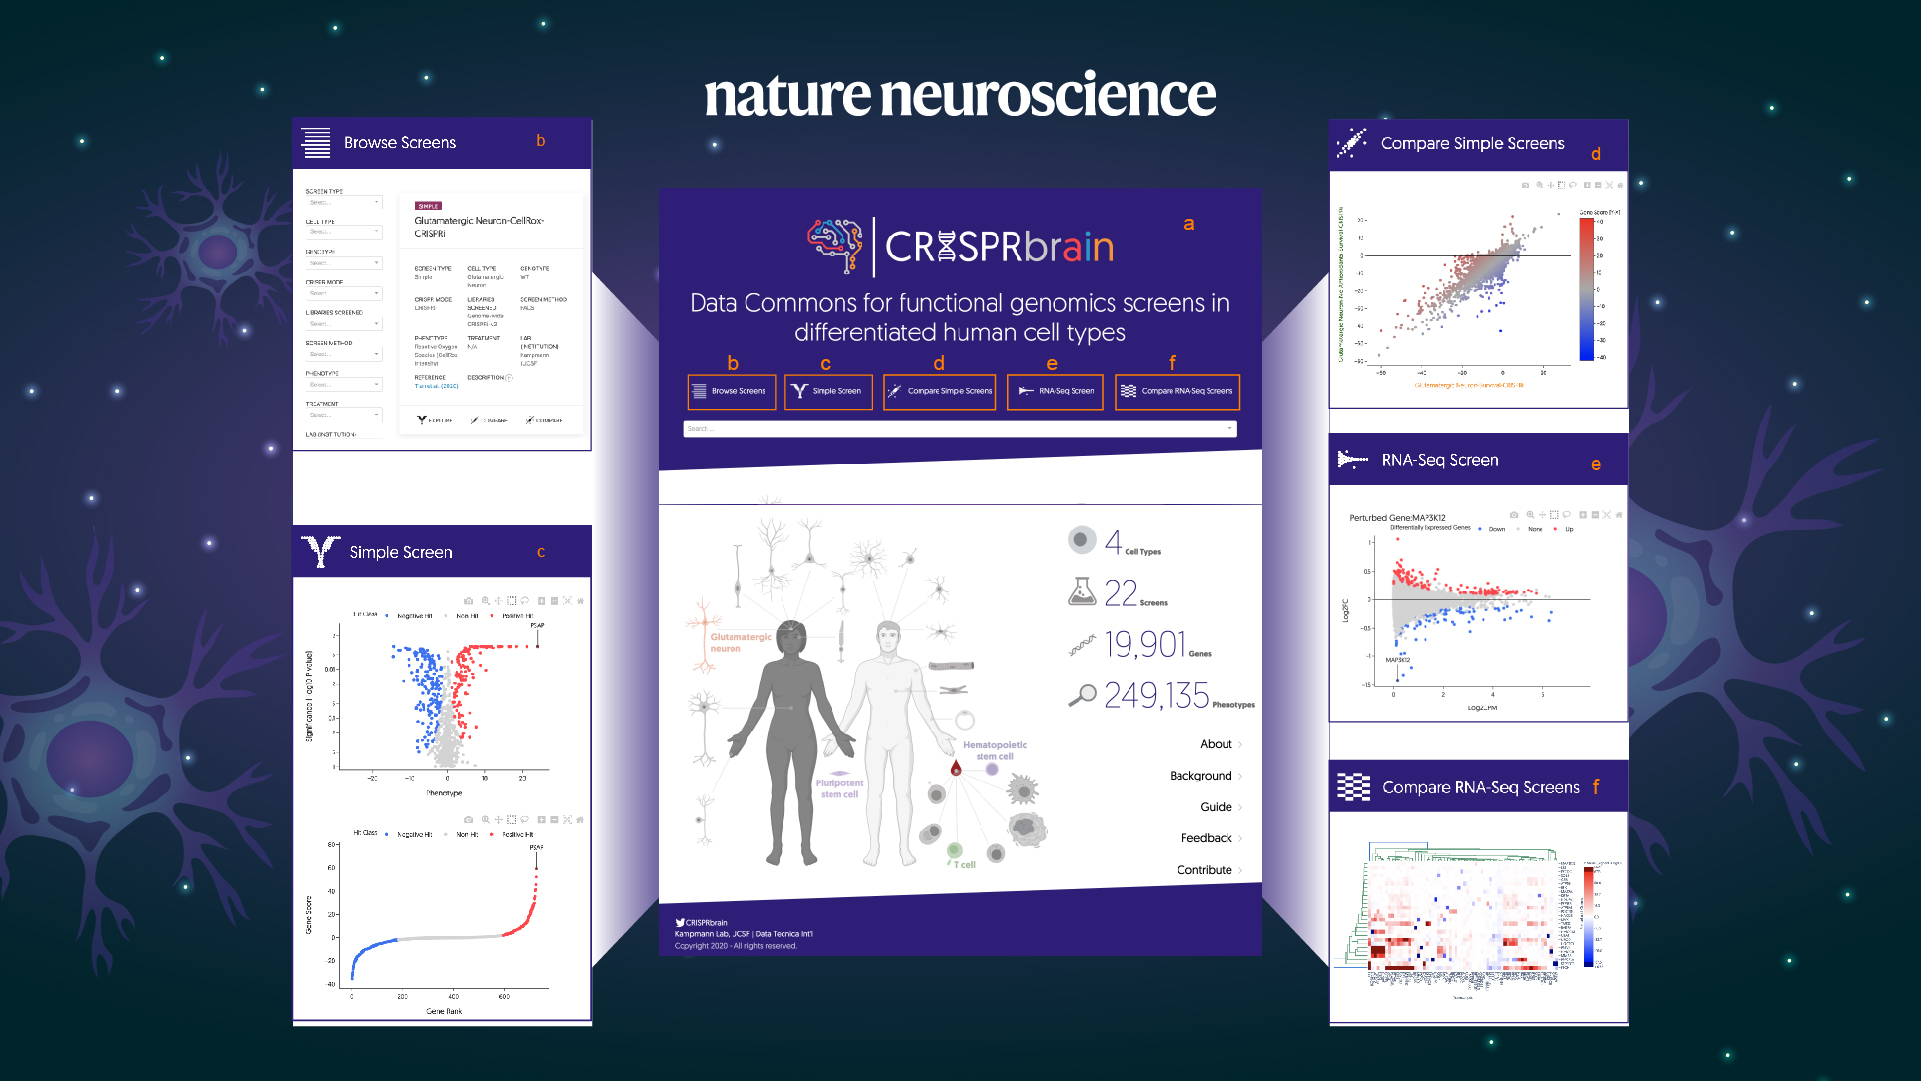 SUSTech’s Ruilin Tian publishes research that reveals new mechanism of neuronal ferroptosis through genome-wide CRISPR screens